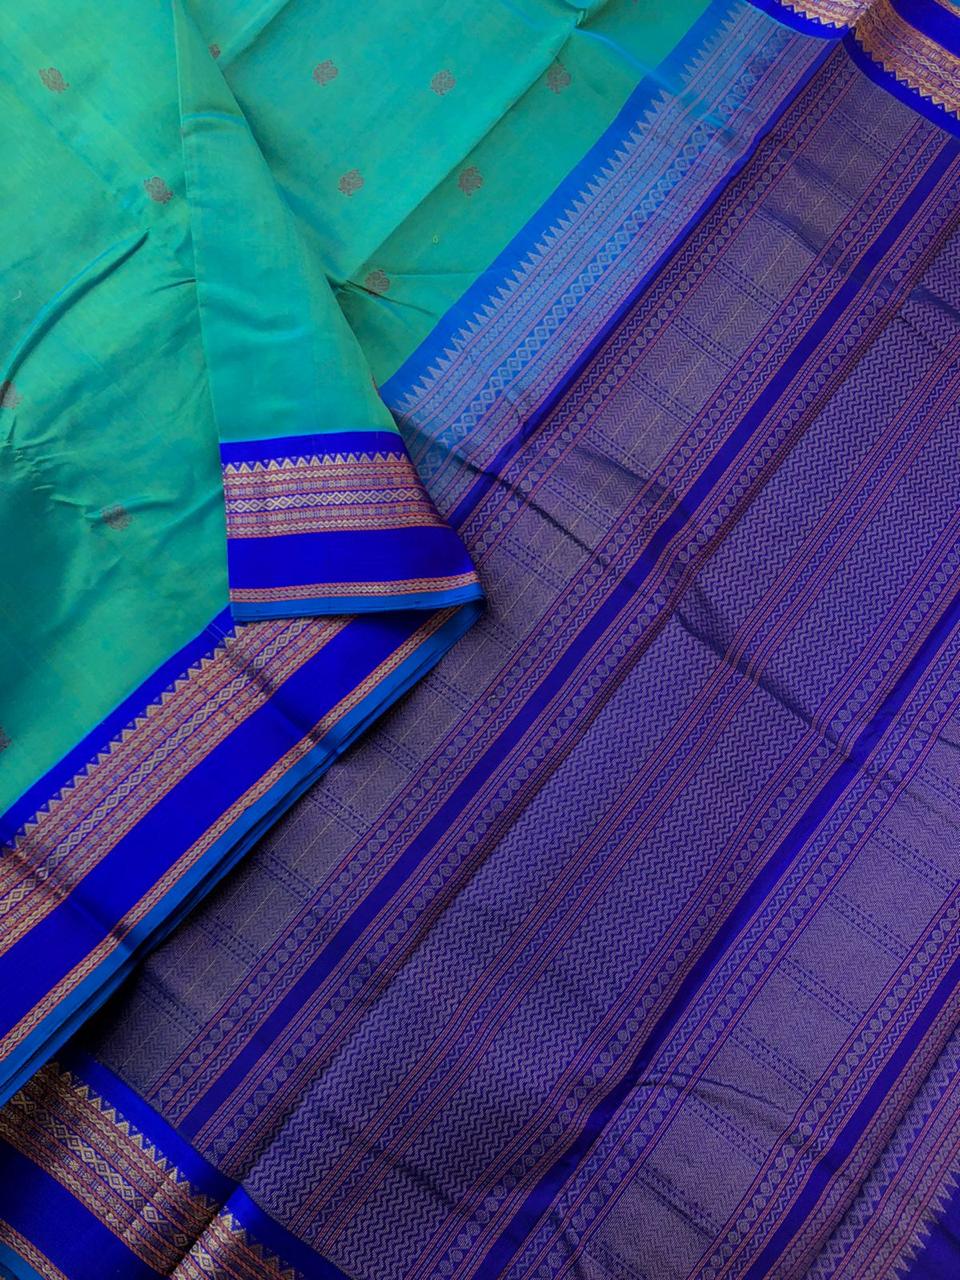 Divyam - Korvai Silk Cotton with Pure Silk Woven Borders - perfect dual tone teal blue on blue